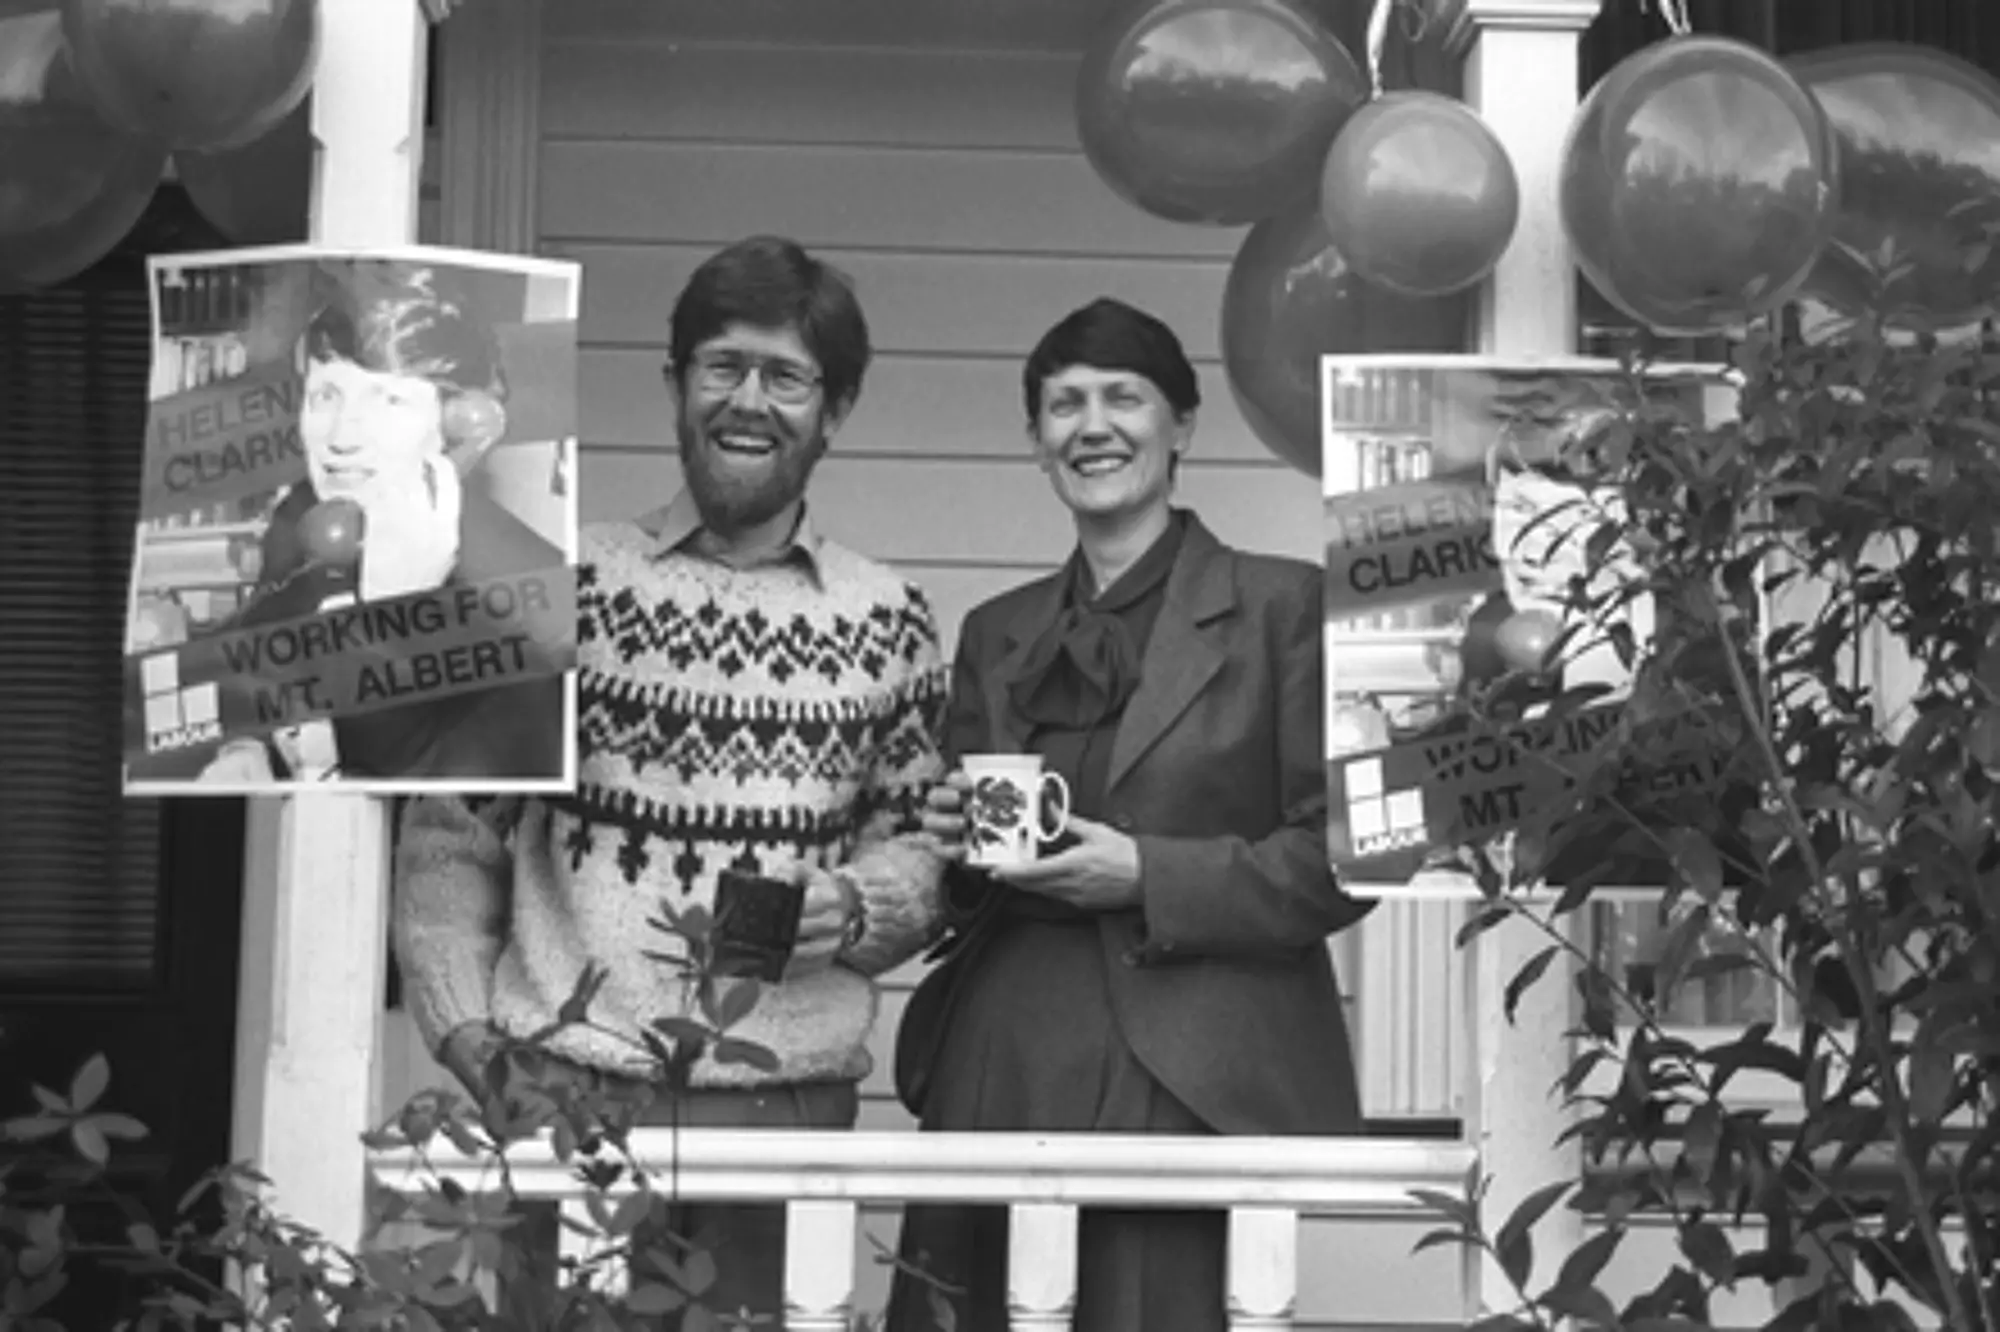 At home with husband Peter Davis welcoming return of Helen Clark as deputy Prime Minister, 1989